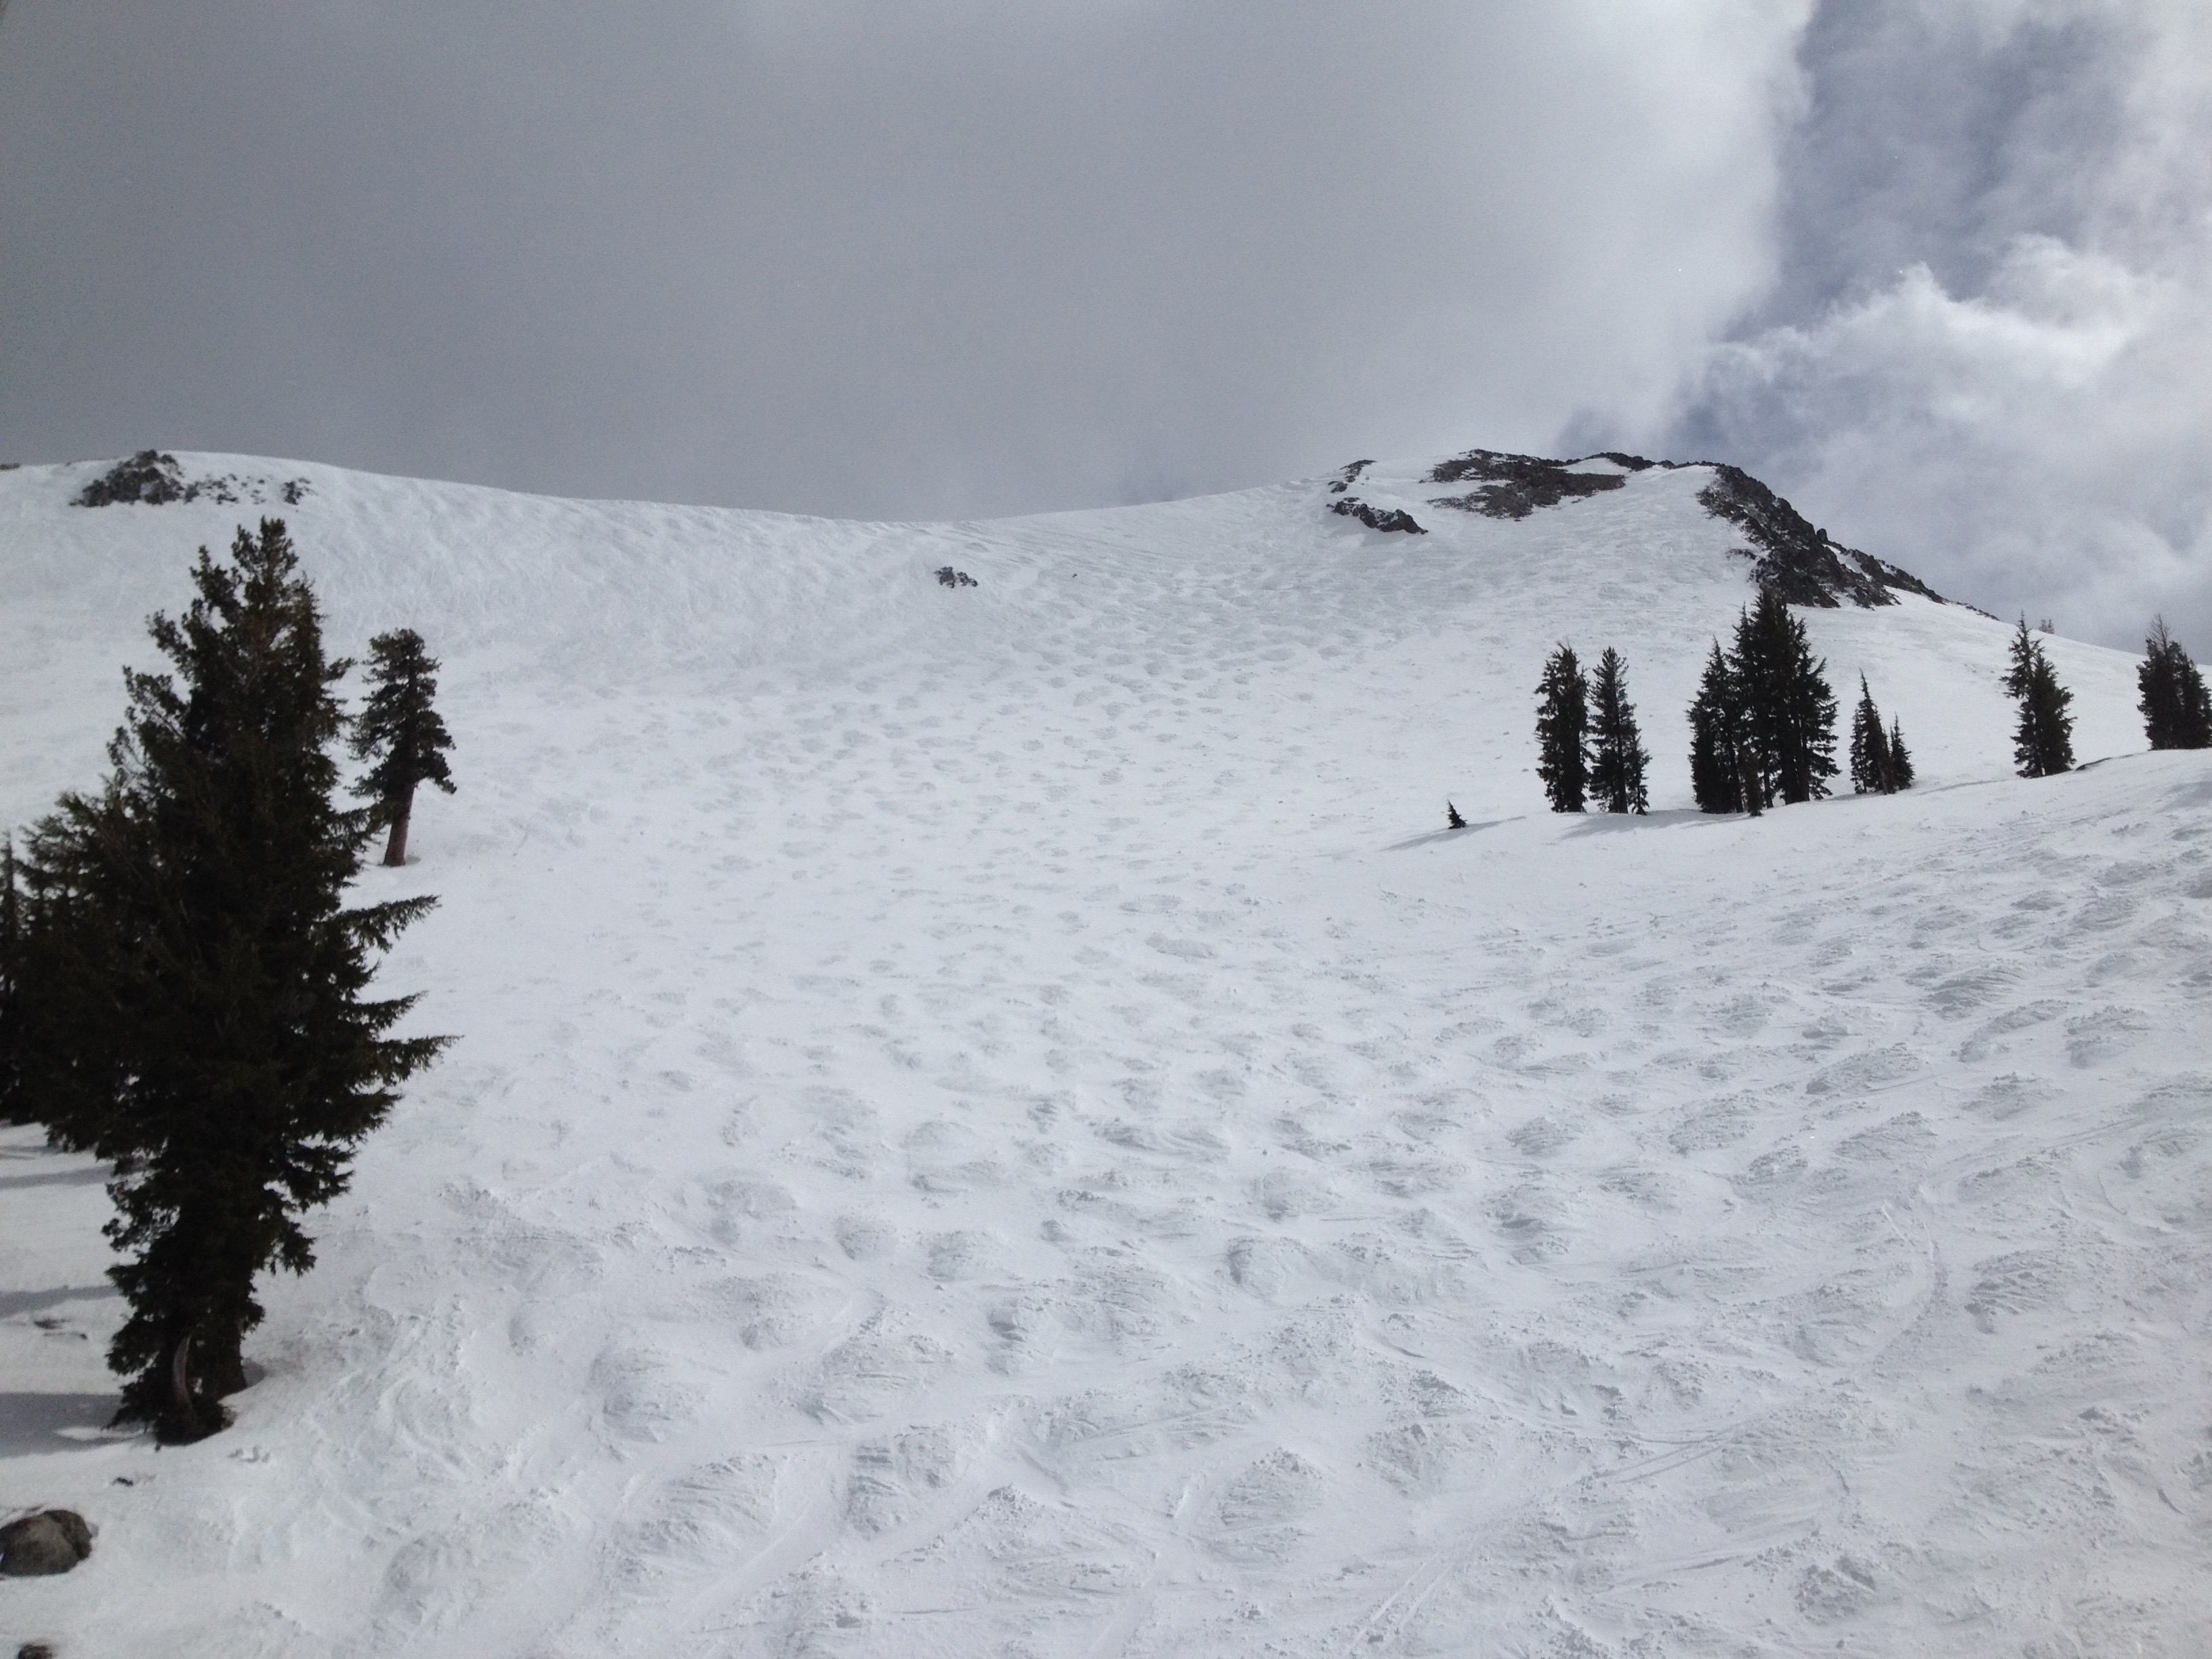 Ferocious and untouched bumps in North Bowl today.